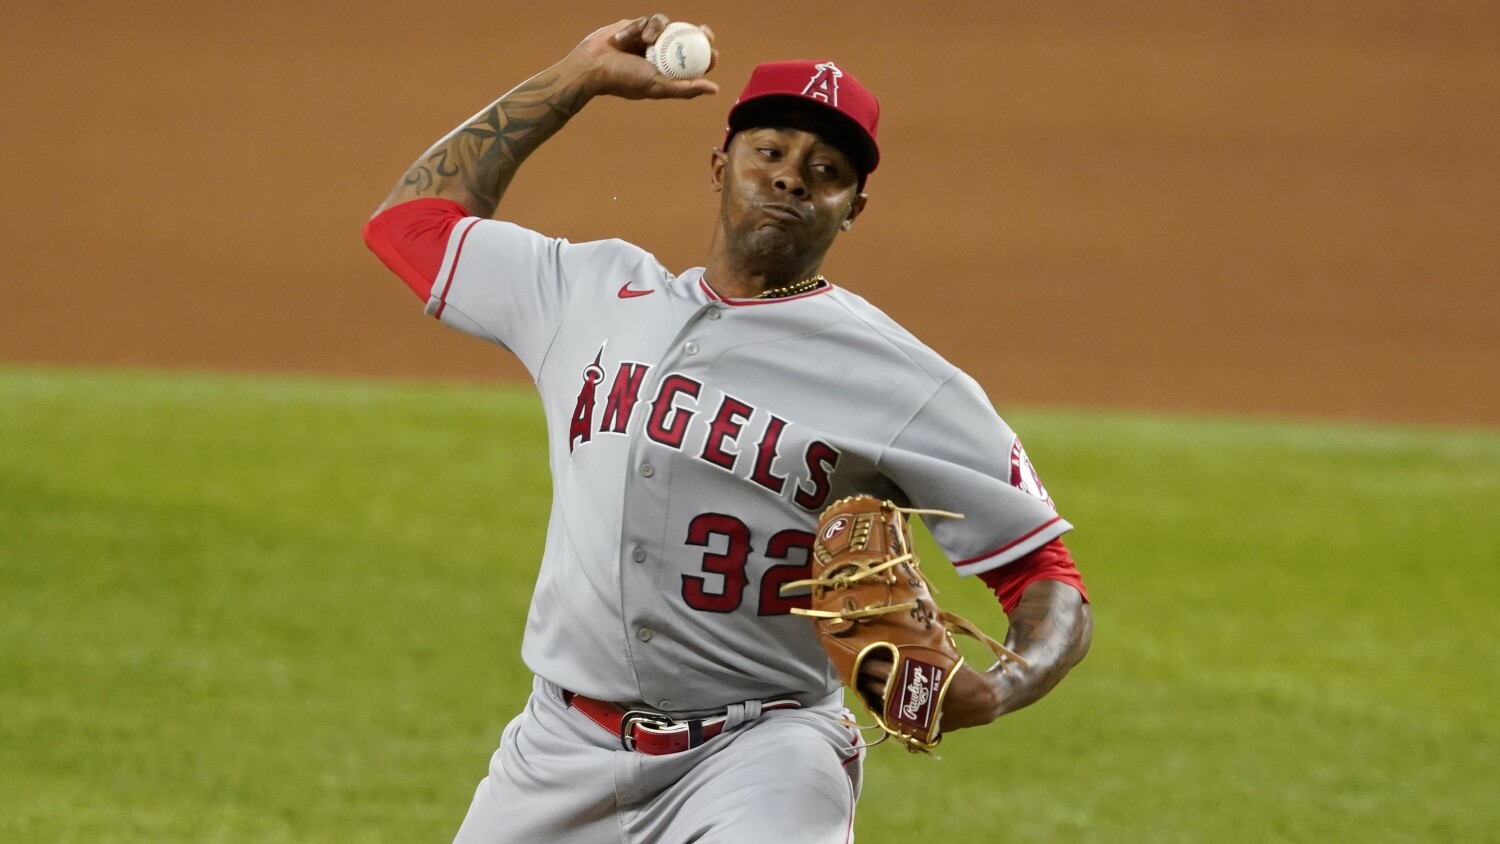 Lockout begins with the Angels still needing starting pitching